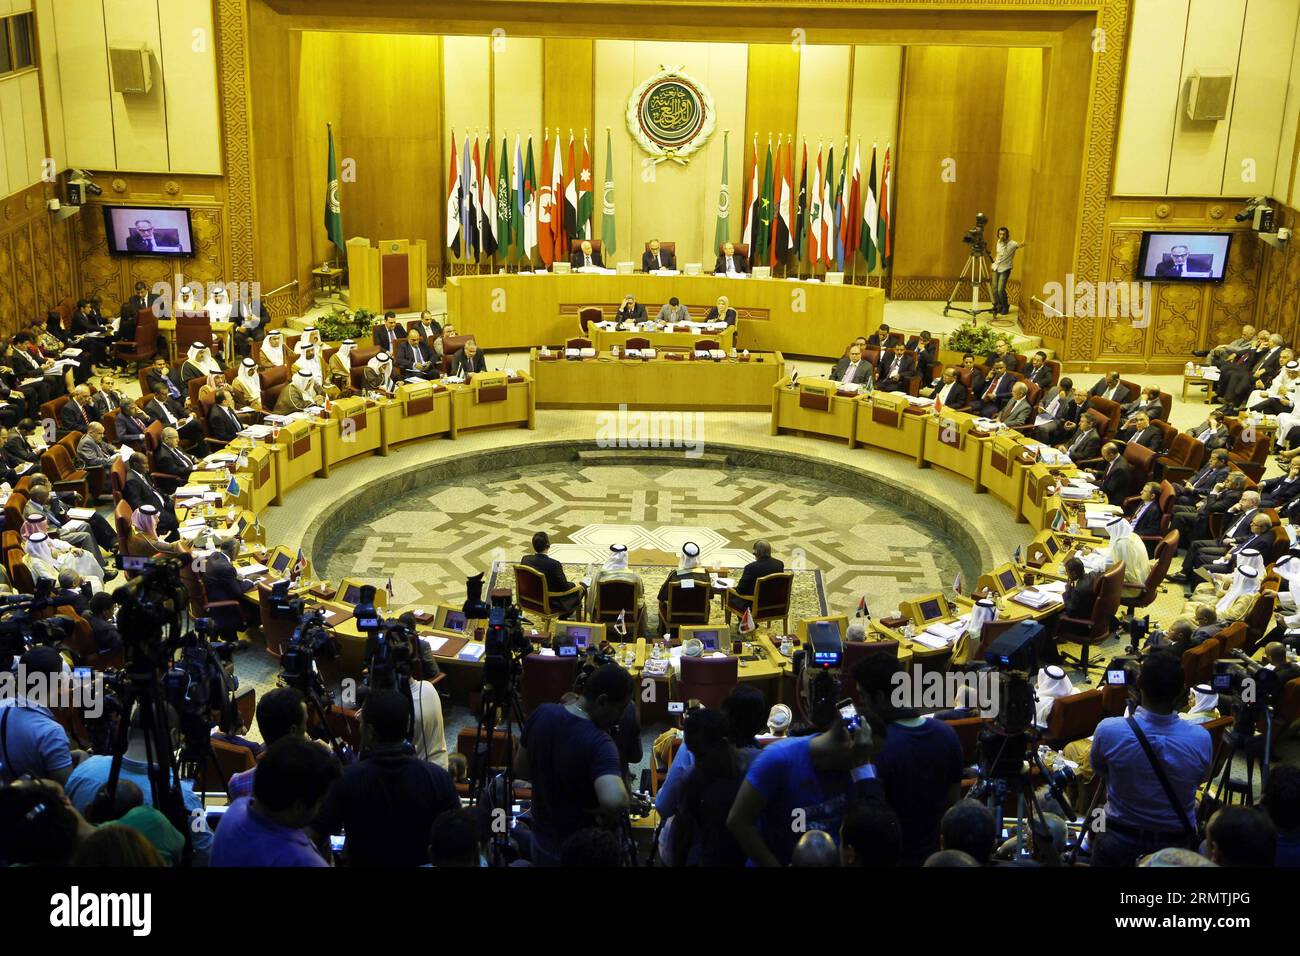 (140907) -- CAIRO, Sept. 7, 2014 -- An emergency meeting is held by foreign ministers of the Arab League in Cairo, Egypt, Sept. 7, 2014. Arab foreign ministers were expected to issue a resolution to confront militants overrunning large areas of Iraq and Syria and declared a cross-border Islamic States. ) EGYPT-ARAB LEAGUE-EMERGENCY MEETING AhmedxGomaa PUBLICATIONxNOTxINxCHN   Cairo Sept 7 2014 to EMERGENCY Meeting IS Hero by Foreign Minister of The Arab League in Cairo Egypt Sept 7 2014 Arab Foreign Minister Were expected to Issue a Resolution to confront militant overrunning Large Areas of Ir Stock Photo